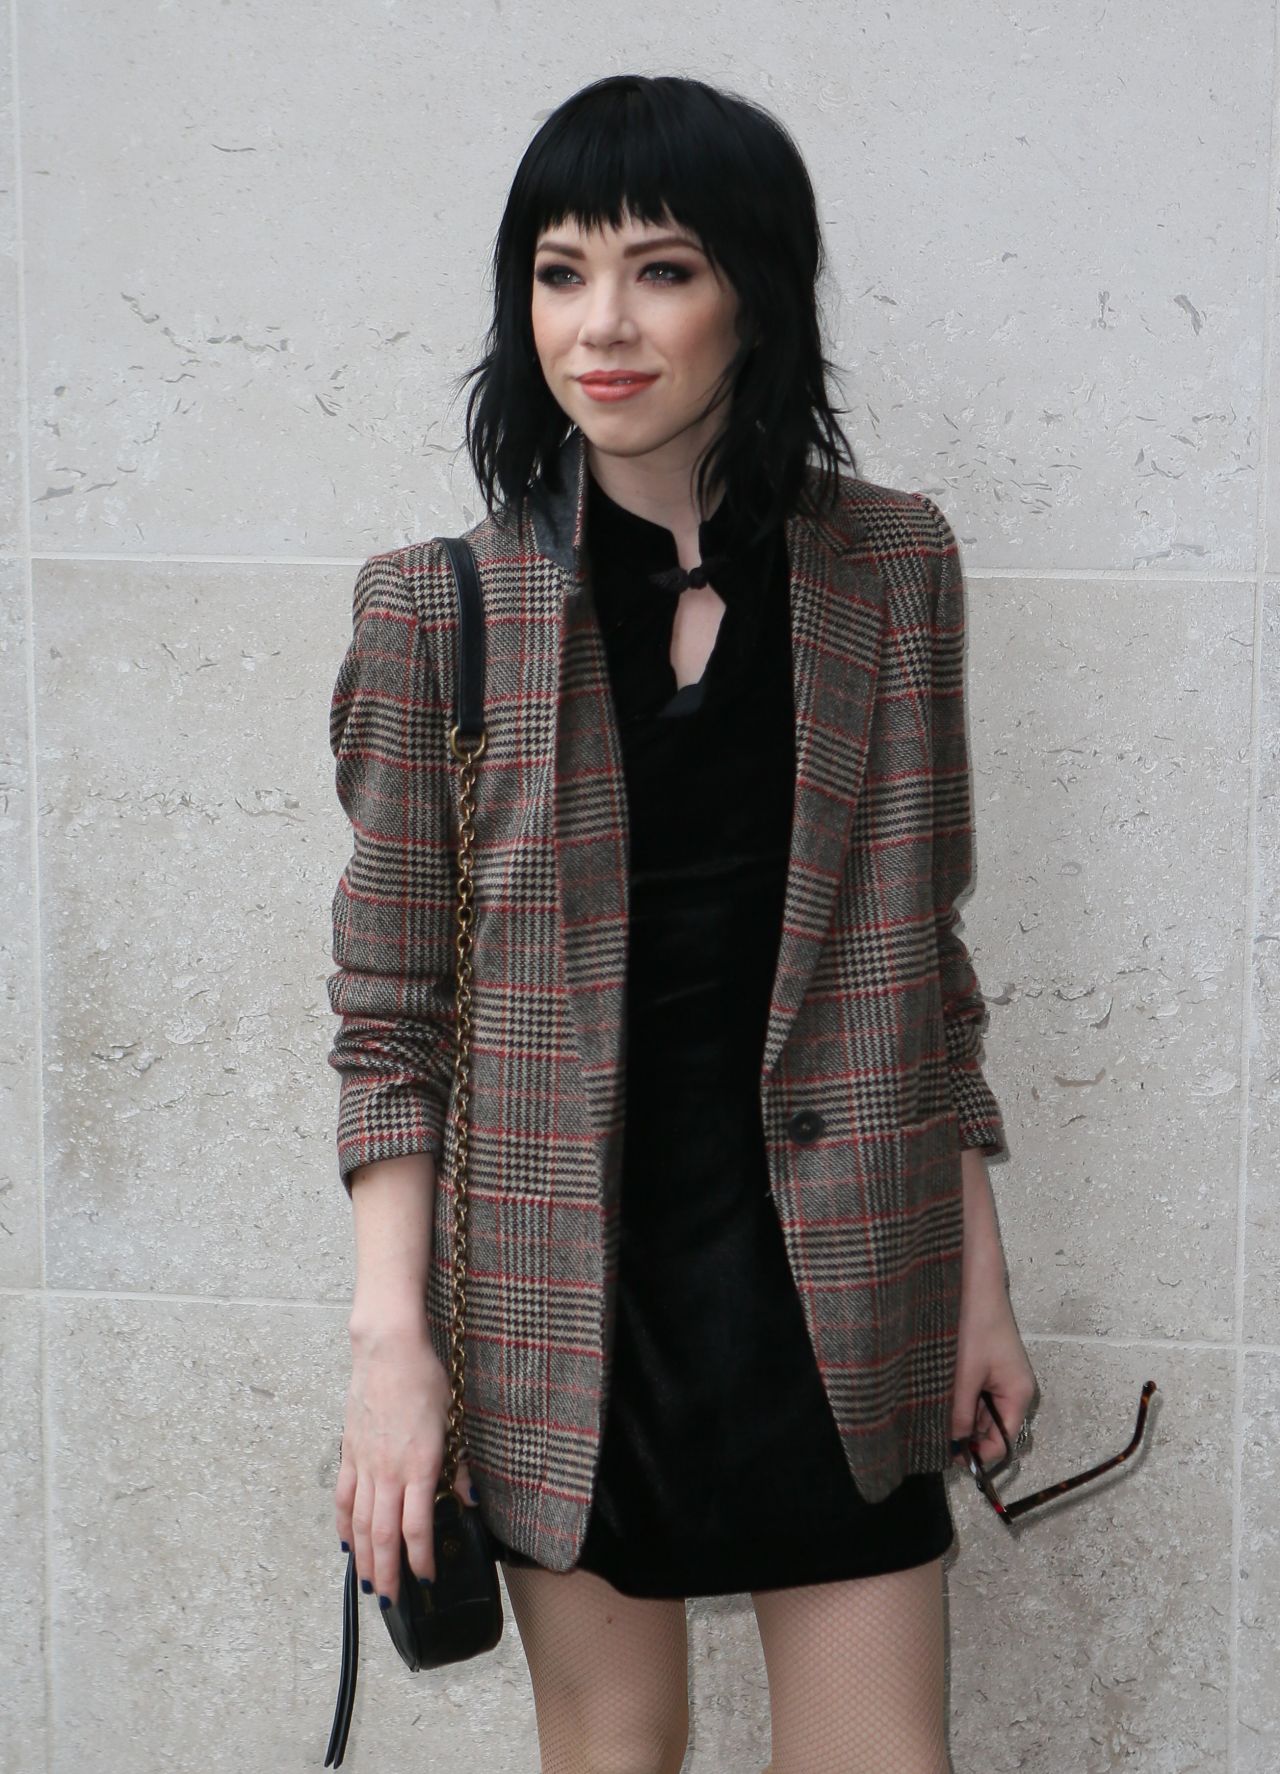 Carly Rae Jepson Style Clothes Outfits And Fashion Naturally We Do Not Have Tiana Deliati